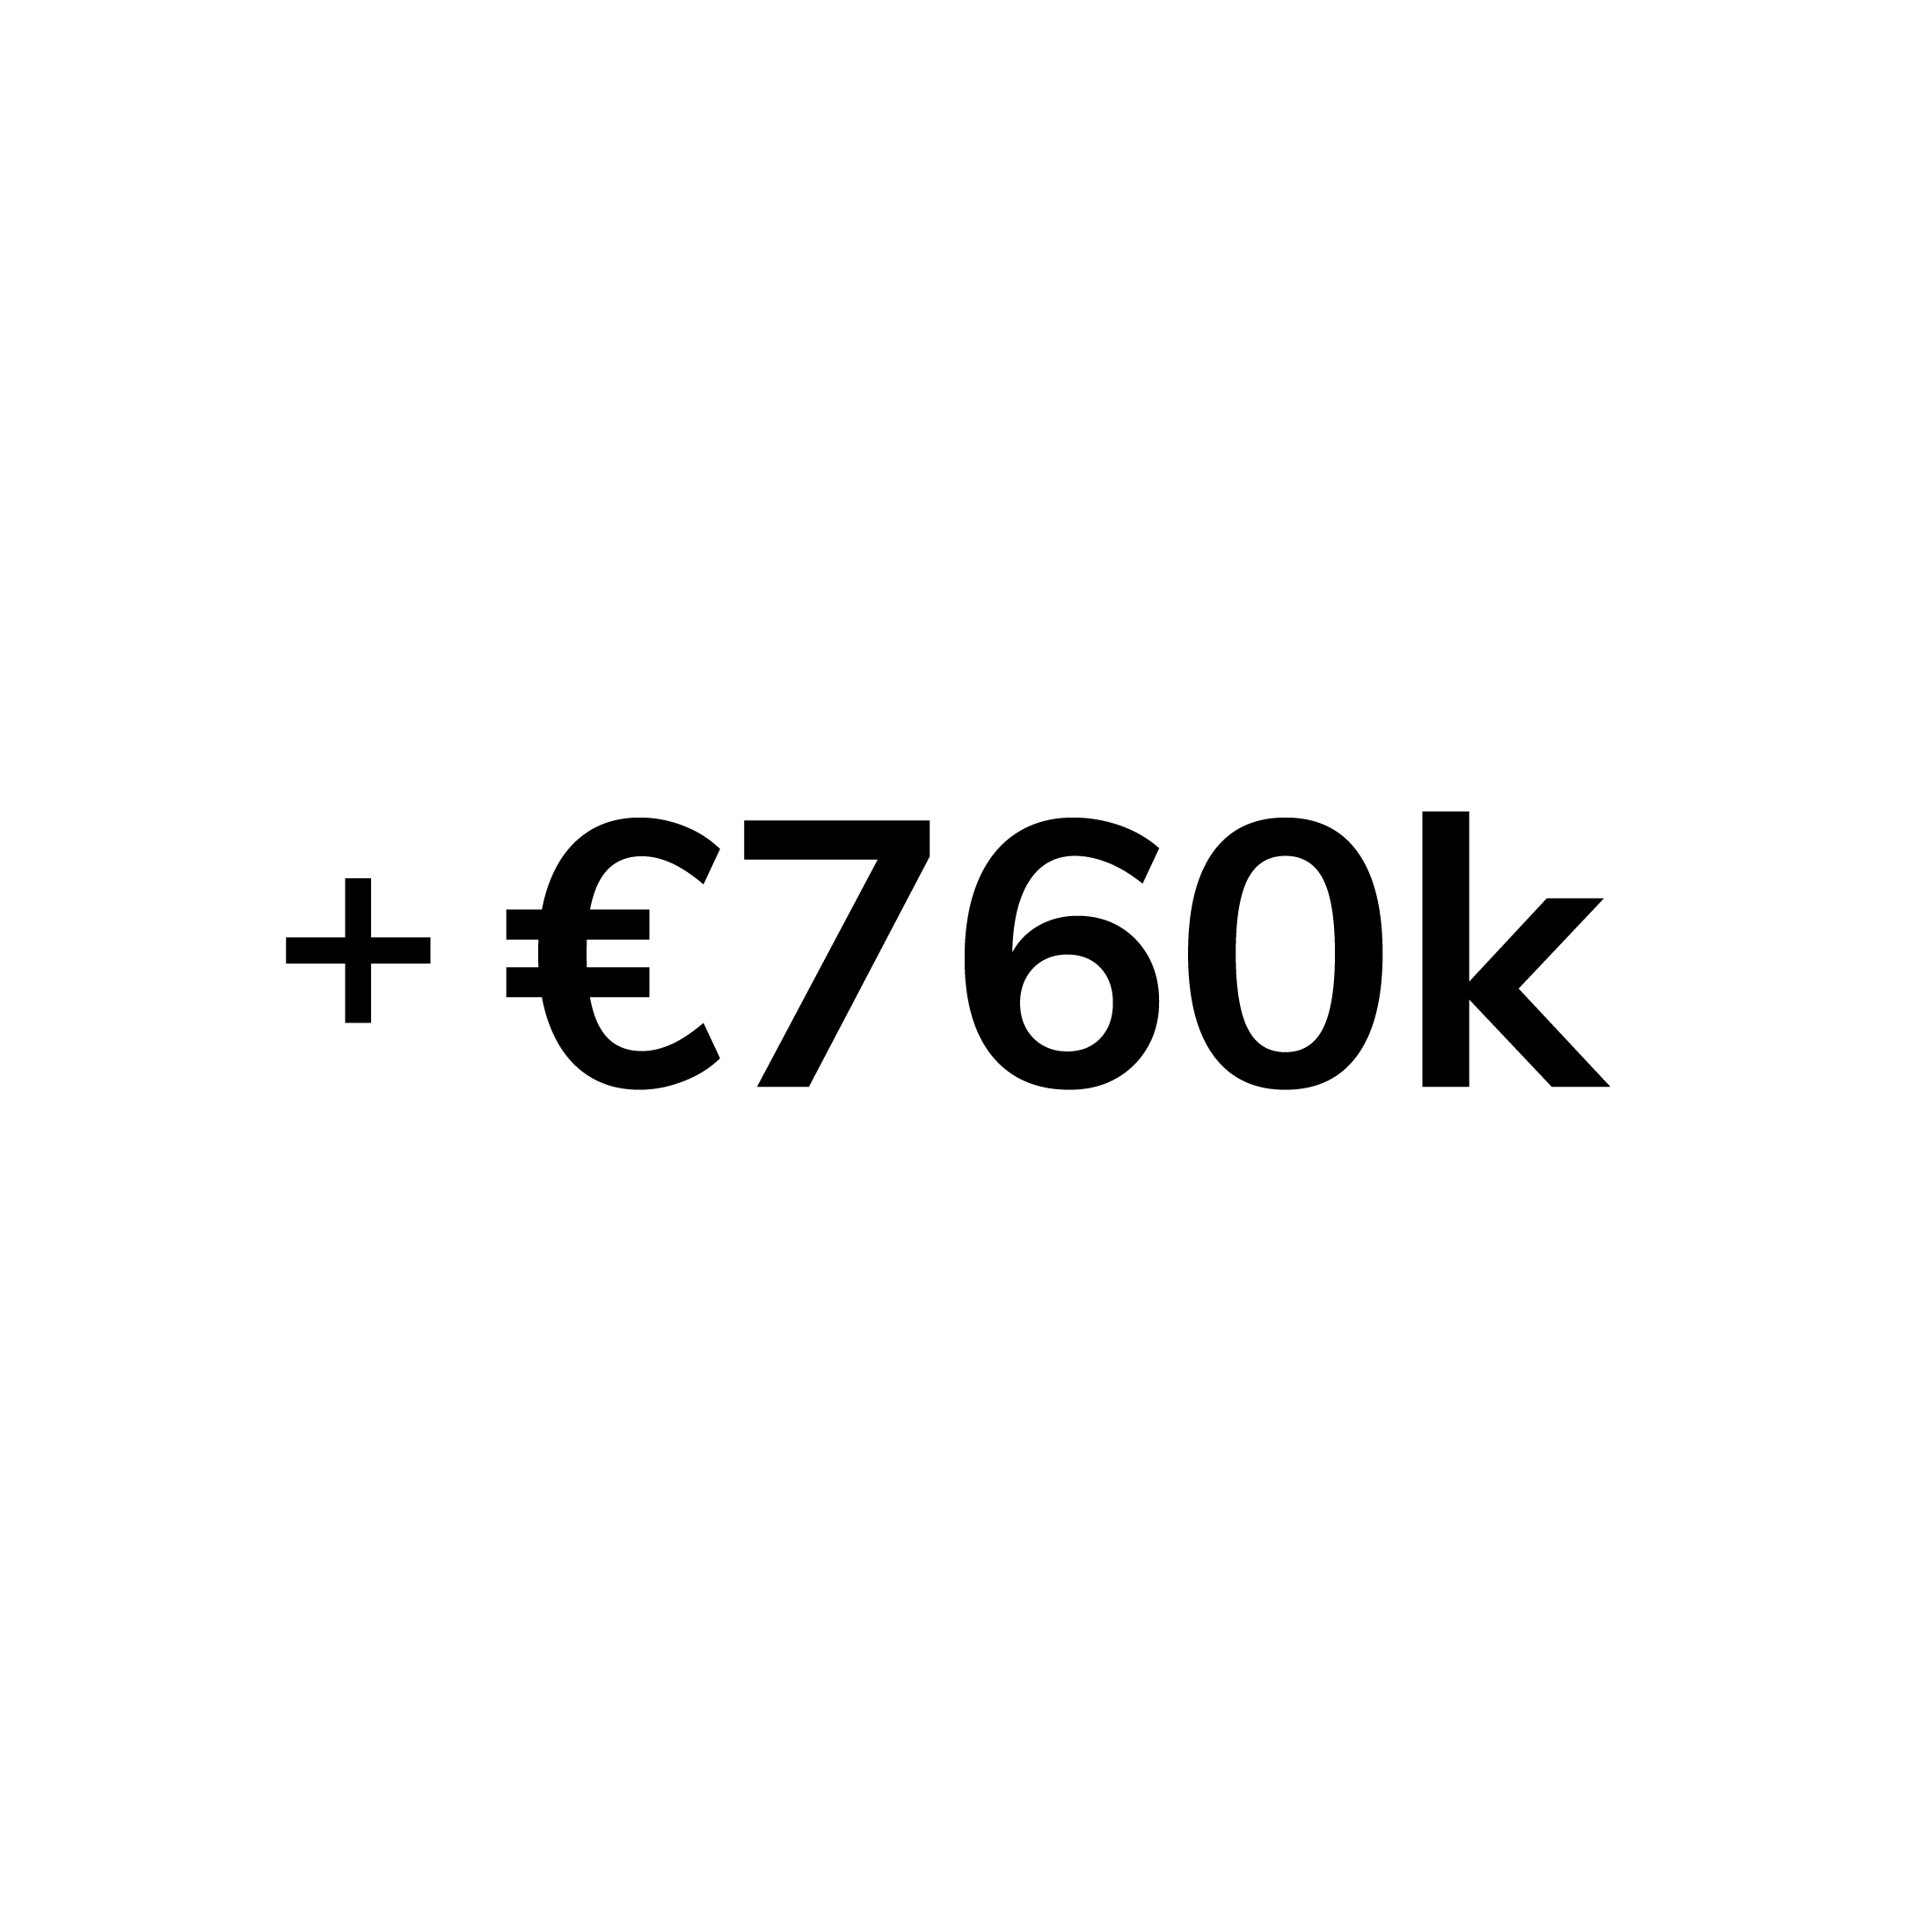 €760k collected per day